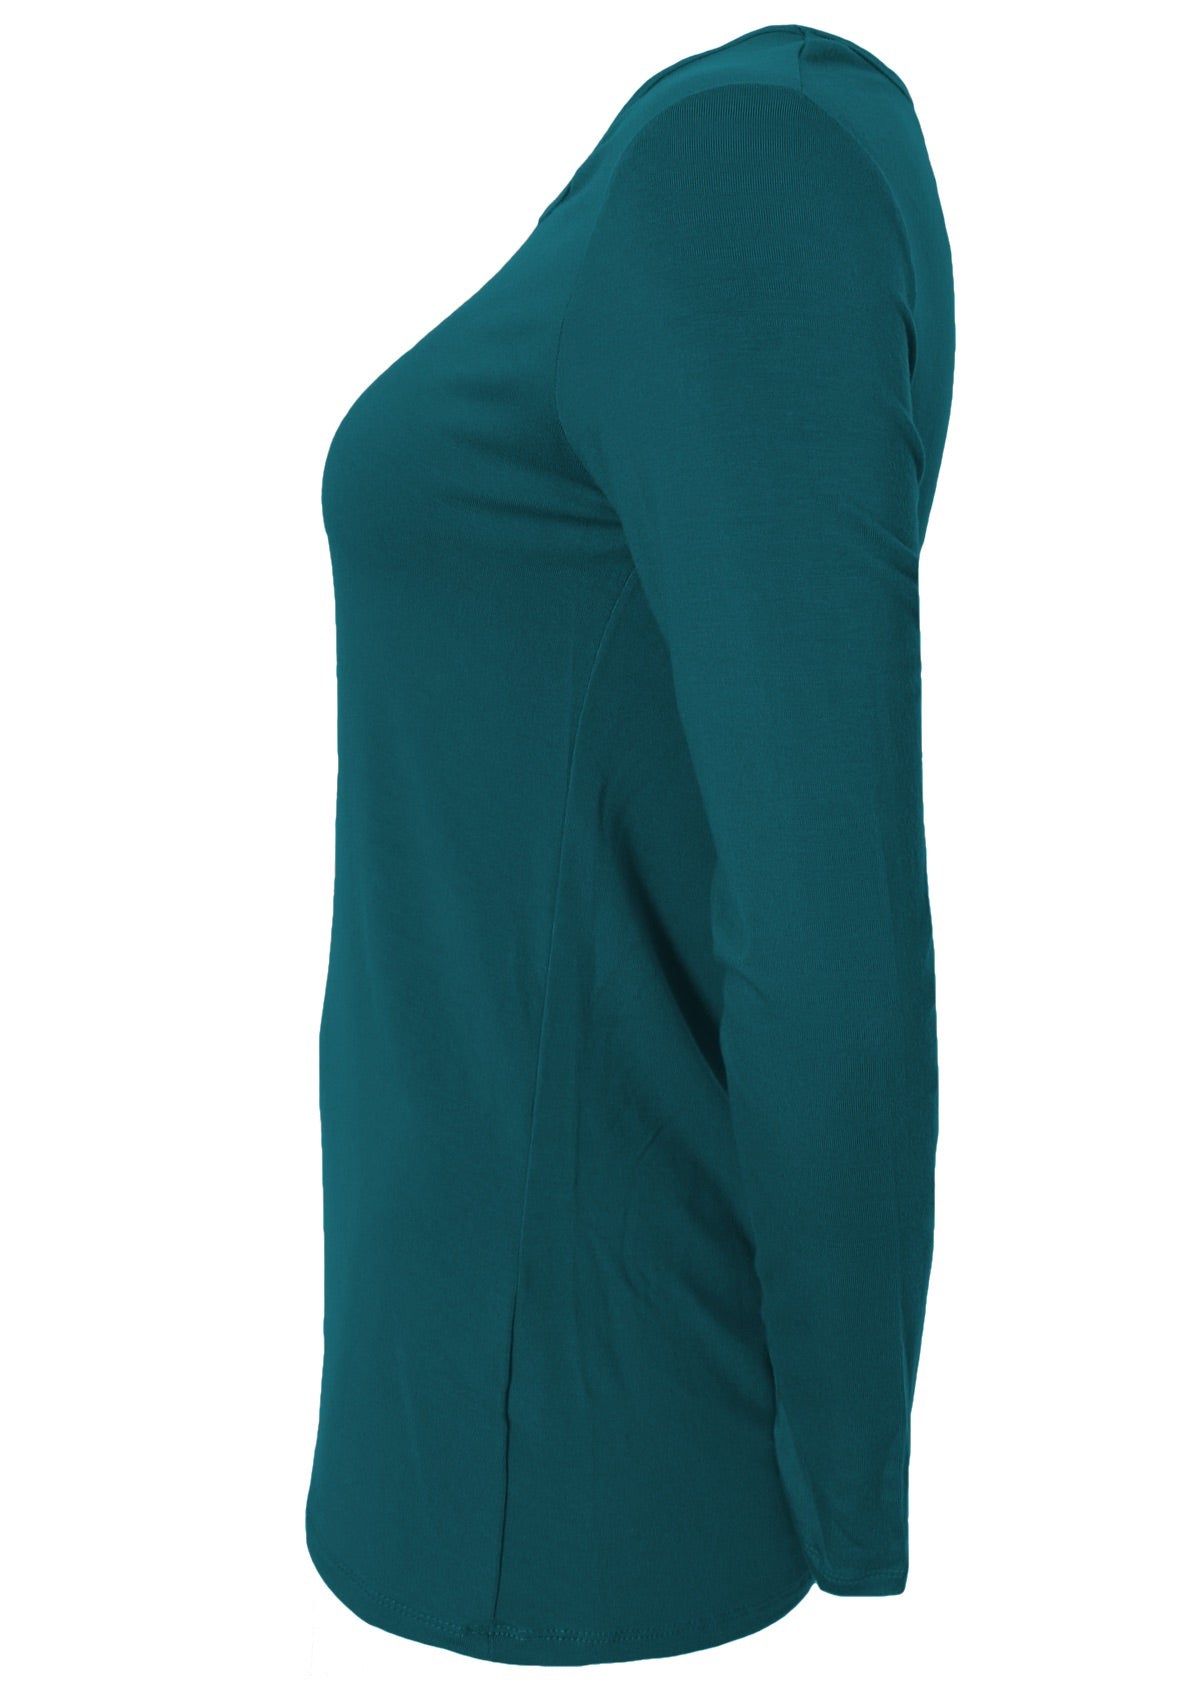 Side view of women's round neck teal long sleeve rayon top.